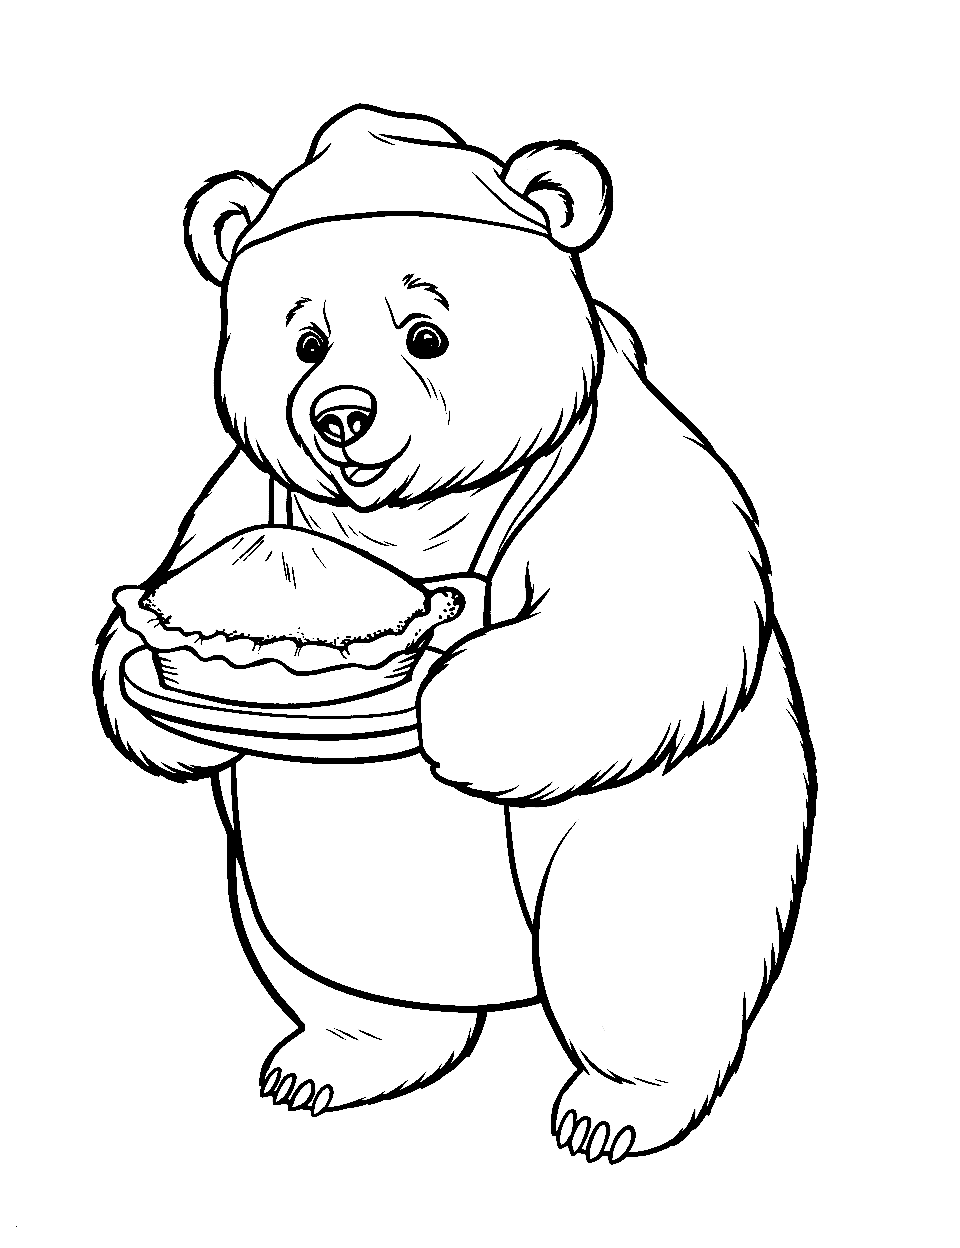 Chef Bear's Yummy Treats Coloring Page - A bear wearing a chef hat showcasing a freshly baked pie.